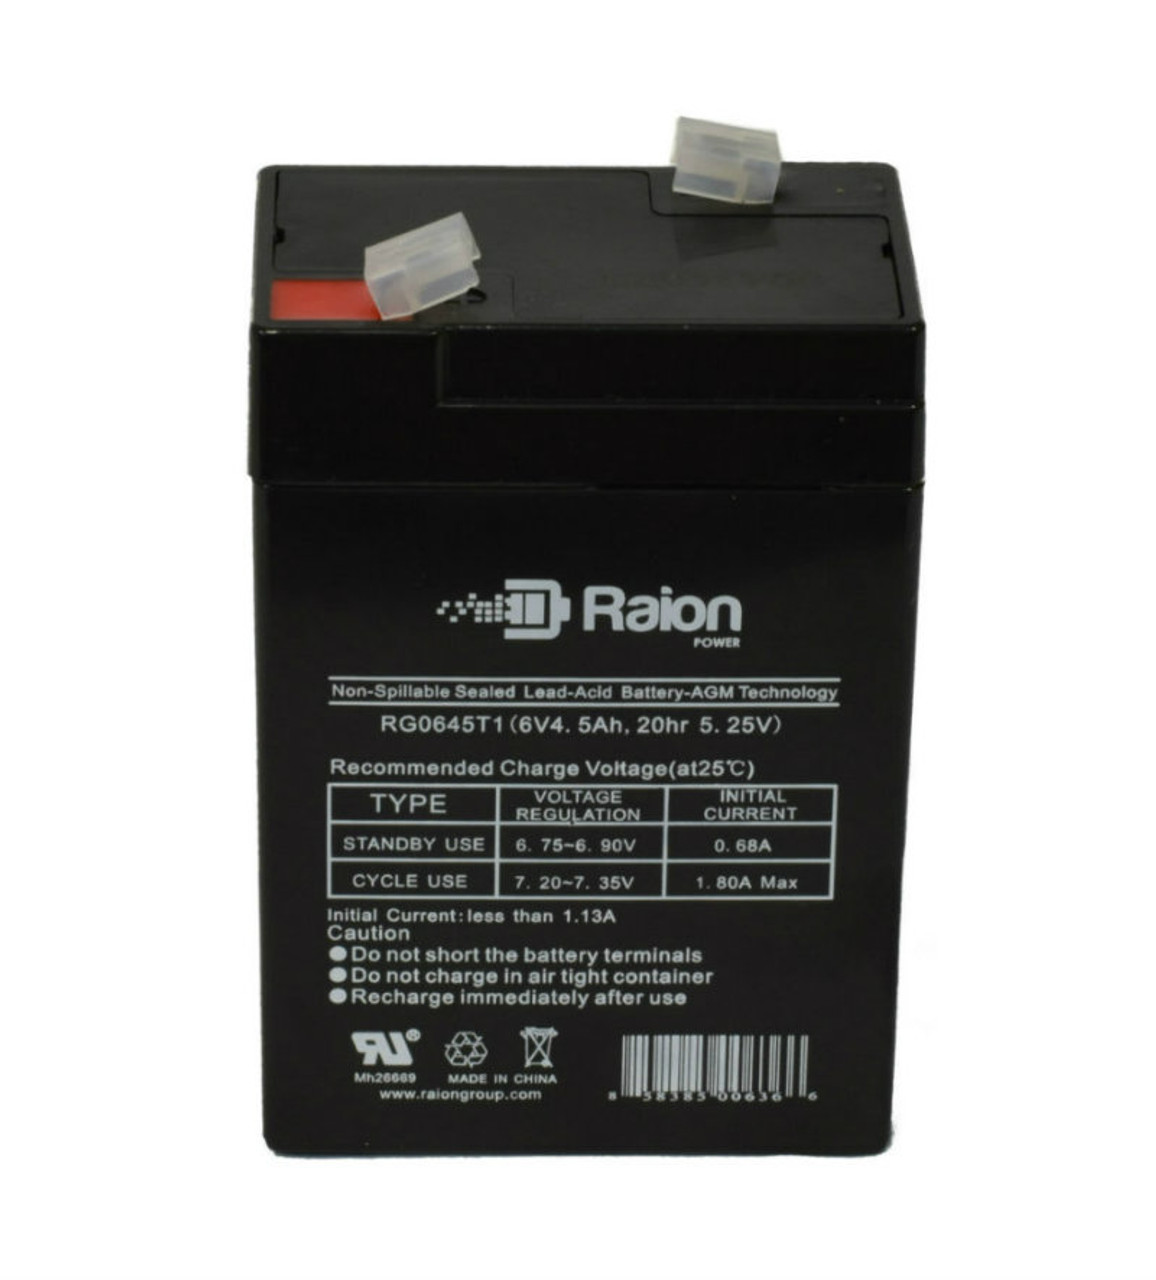 Raion Power RG0645T1 Replacement Battery Cartridge for Quest Medical 521 Plus Variable Press Intell Pump IV